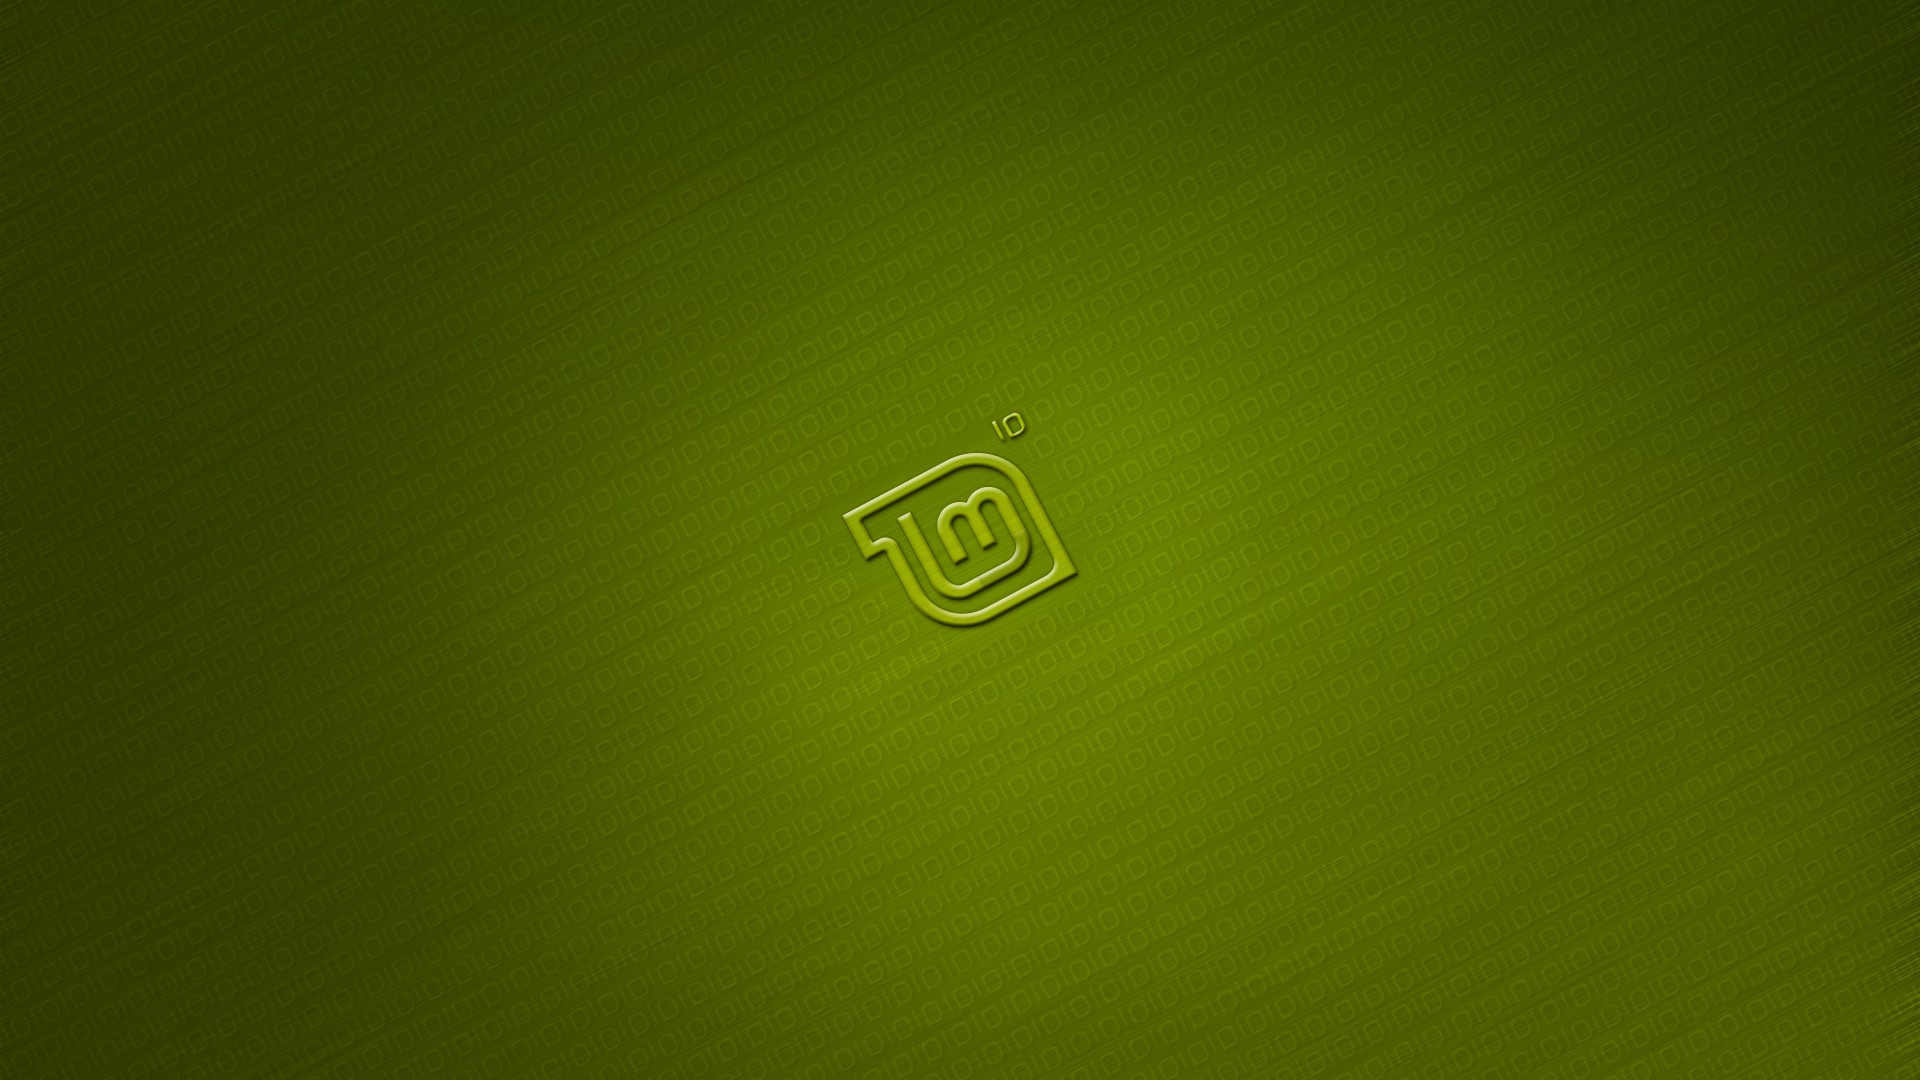 Cute Green Desktop Wallpaper with resolution 1920X1080 pixel. You can use this wallpaper as background for your desktop Computer Screensavers, Android or iPhone smartphones